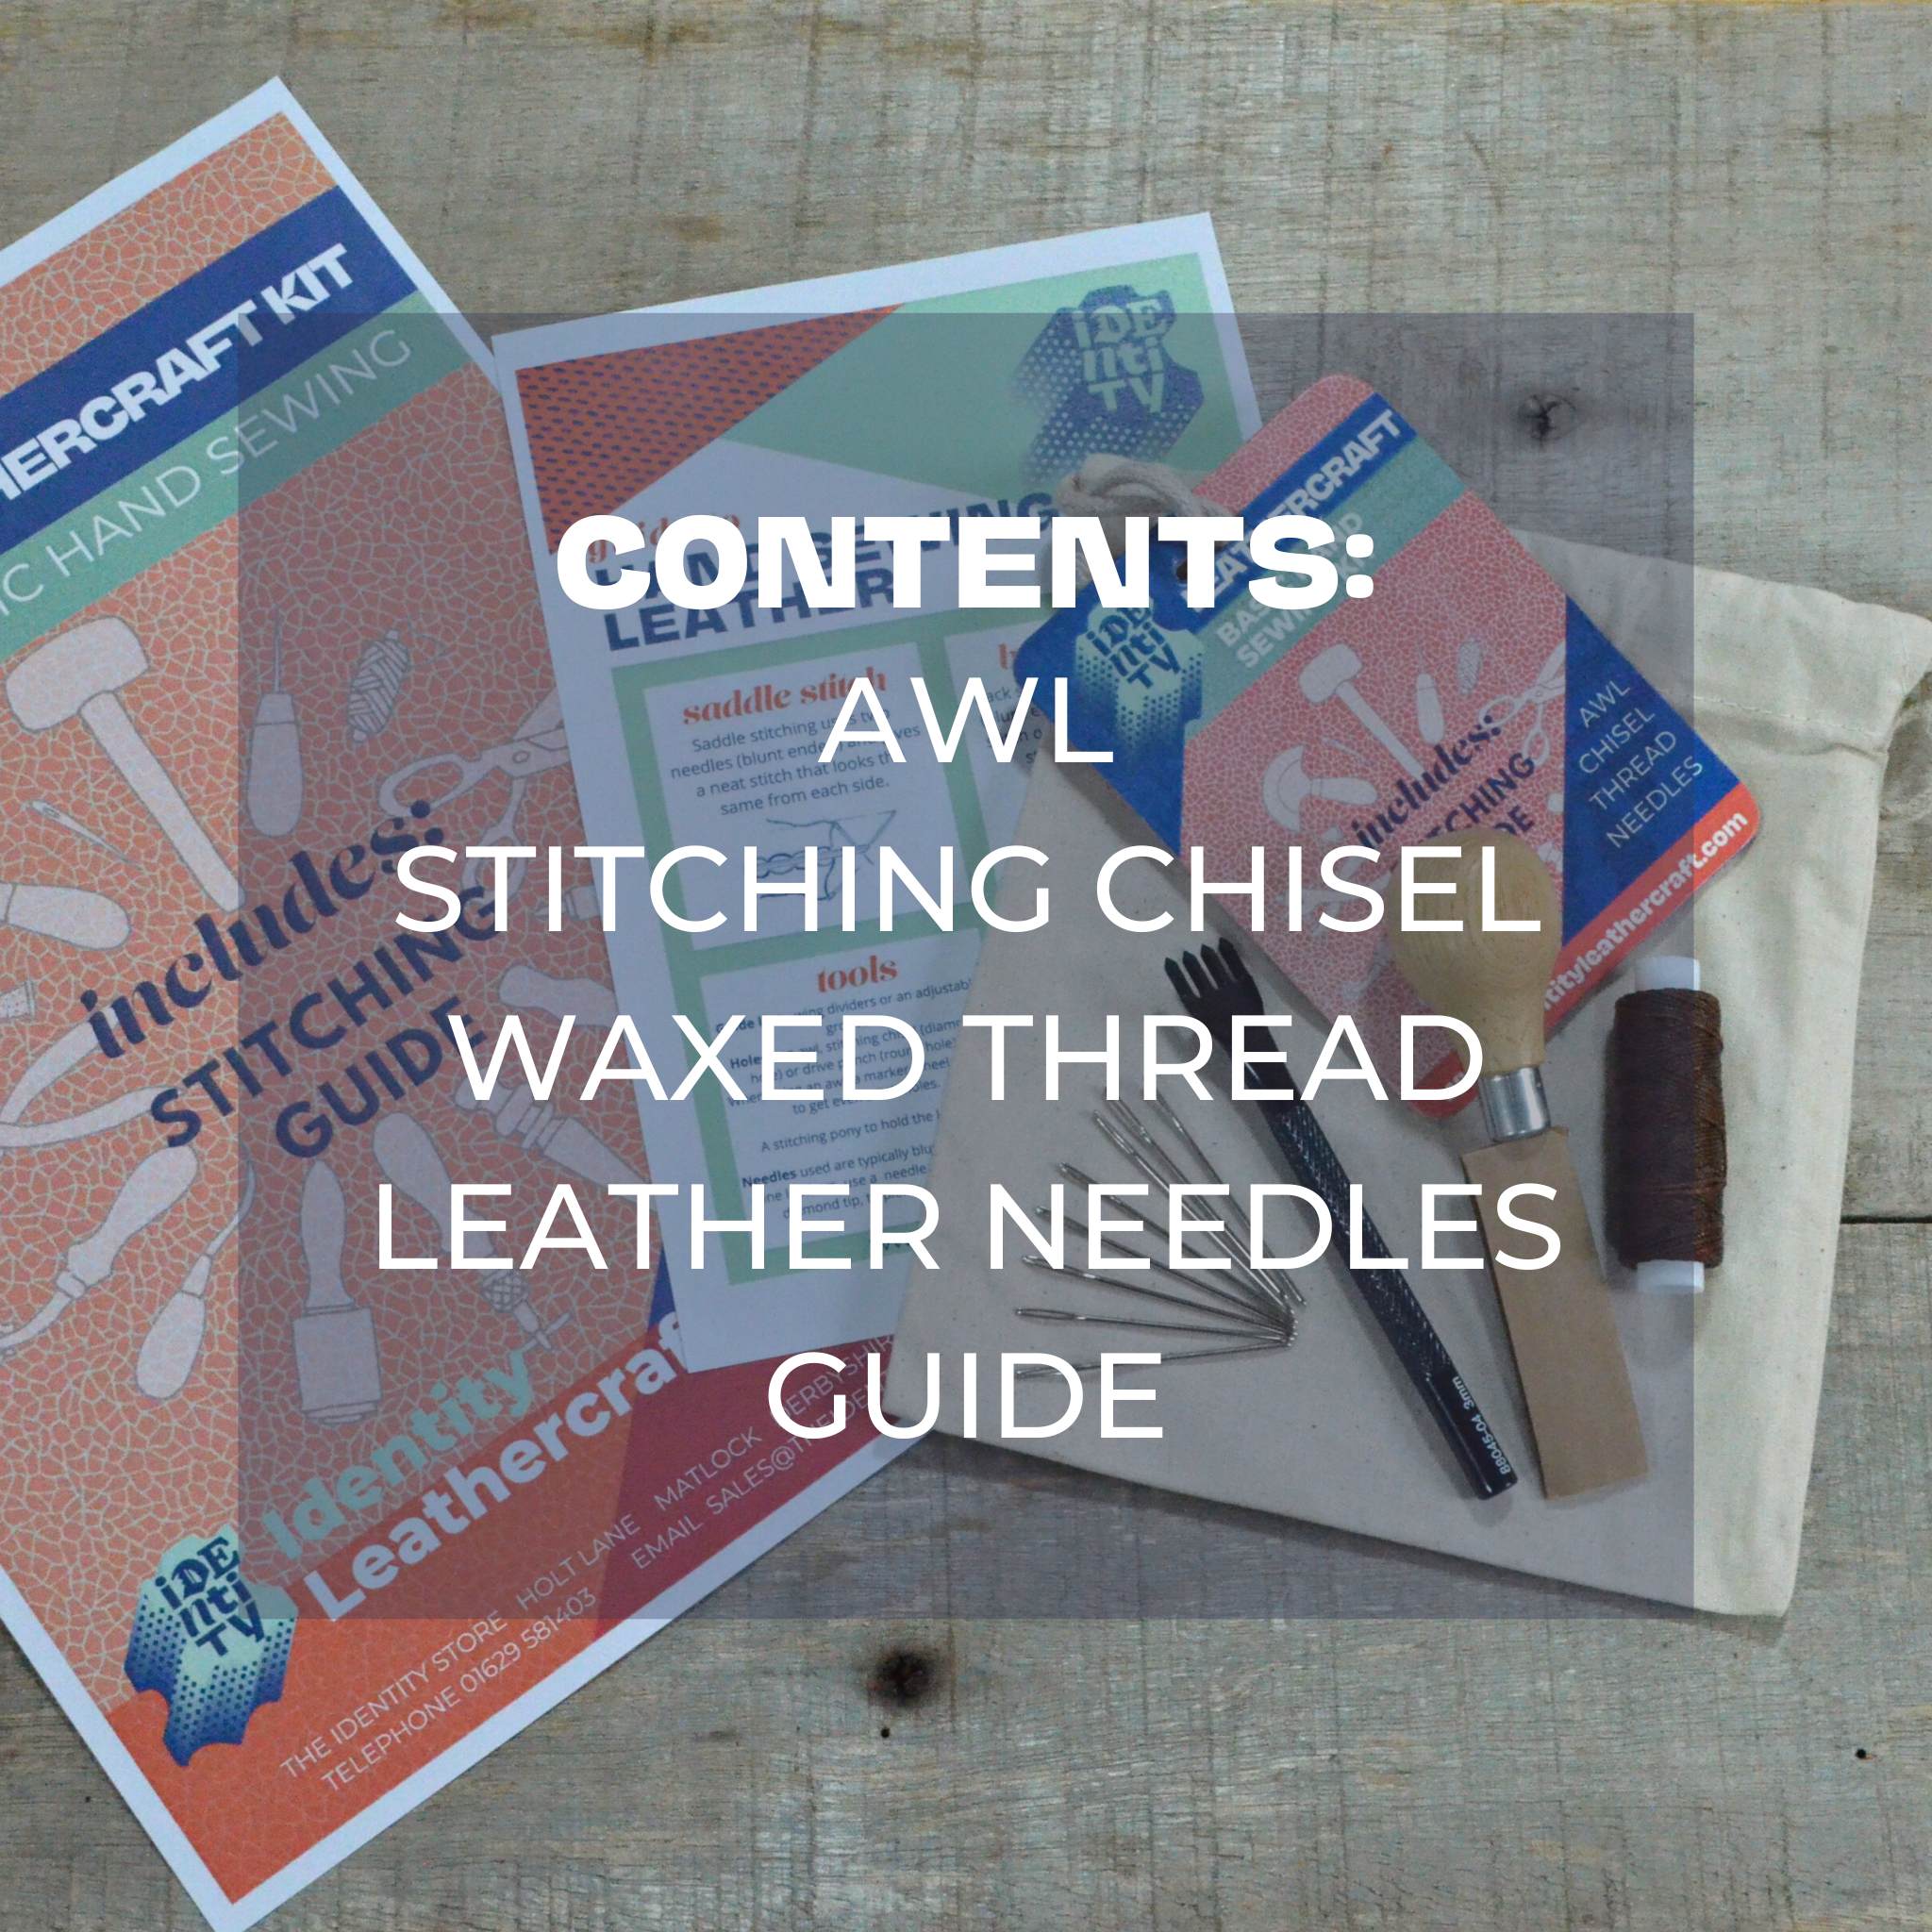 This useful pack will give you a start for hand sewing leather and is ideal for small beginner projects such as card cases, keyrings, and also ideal for repairs